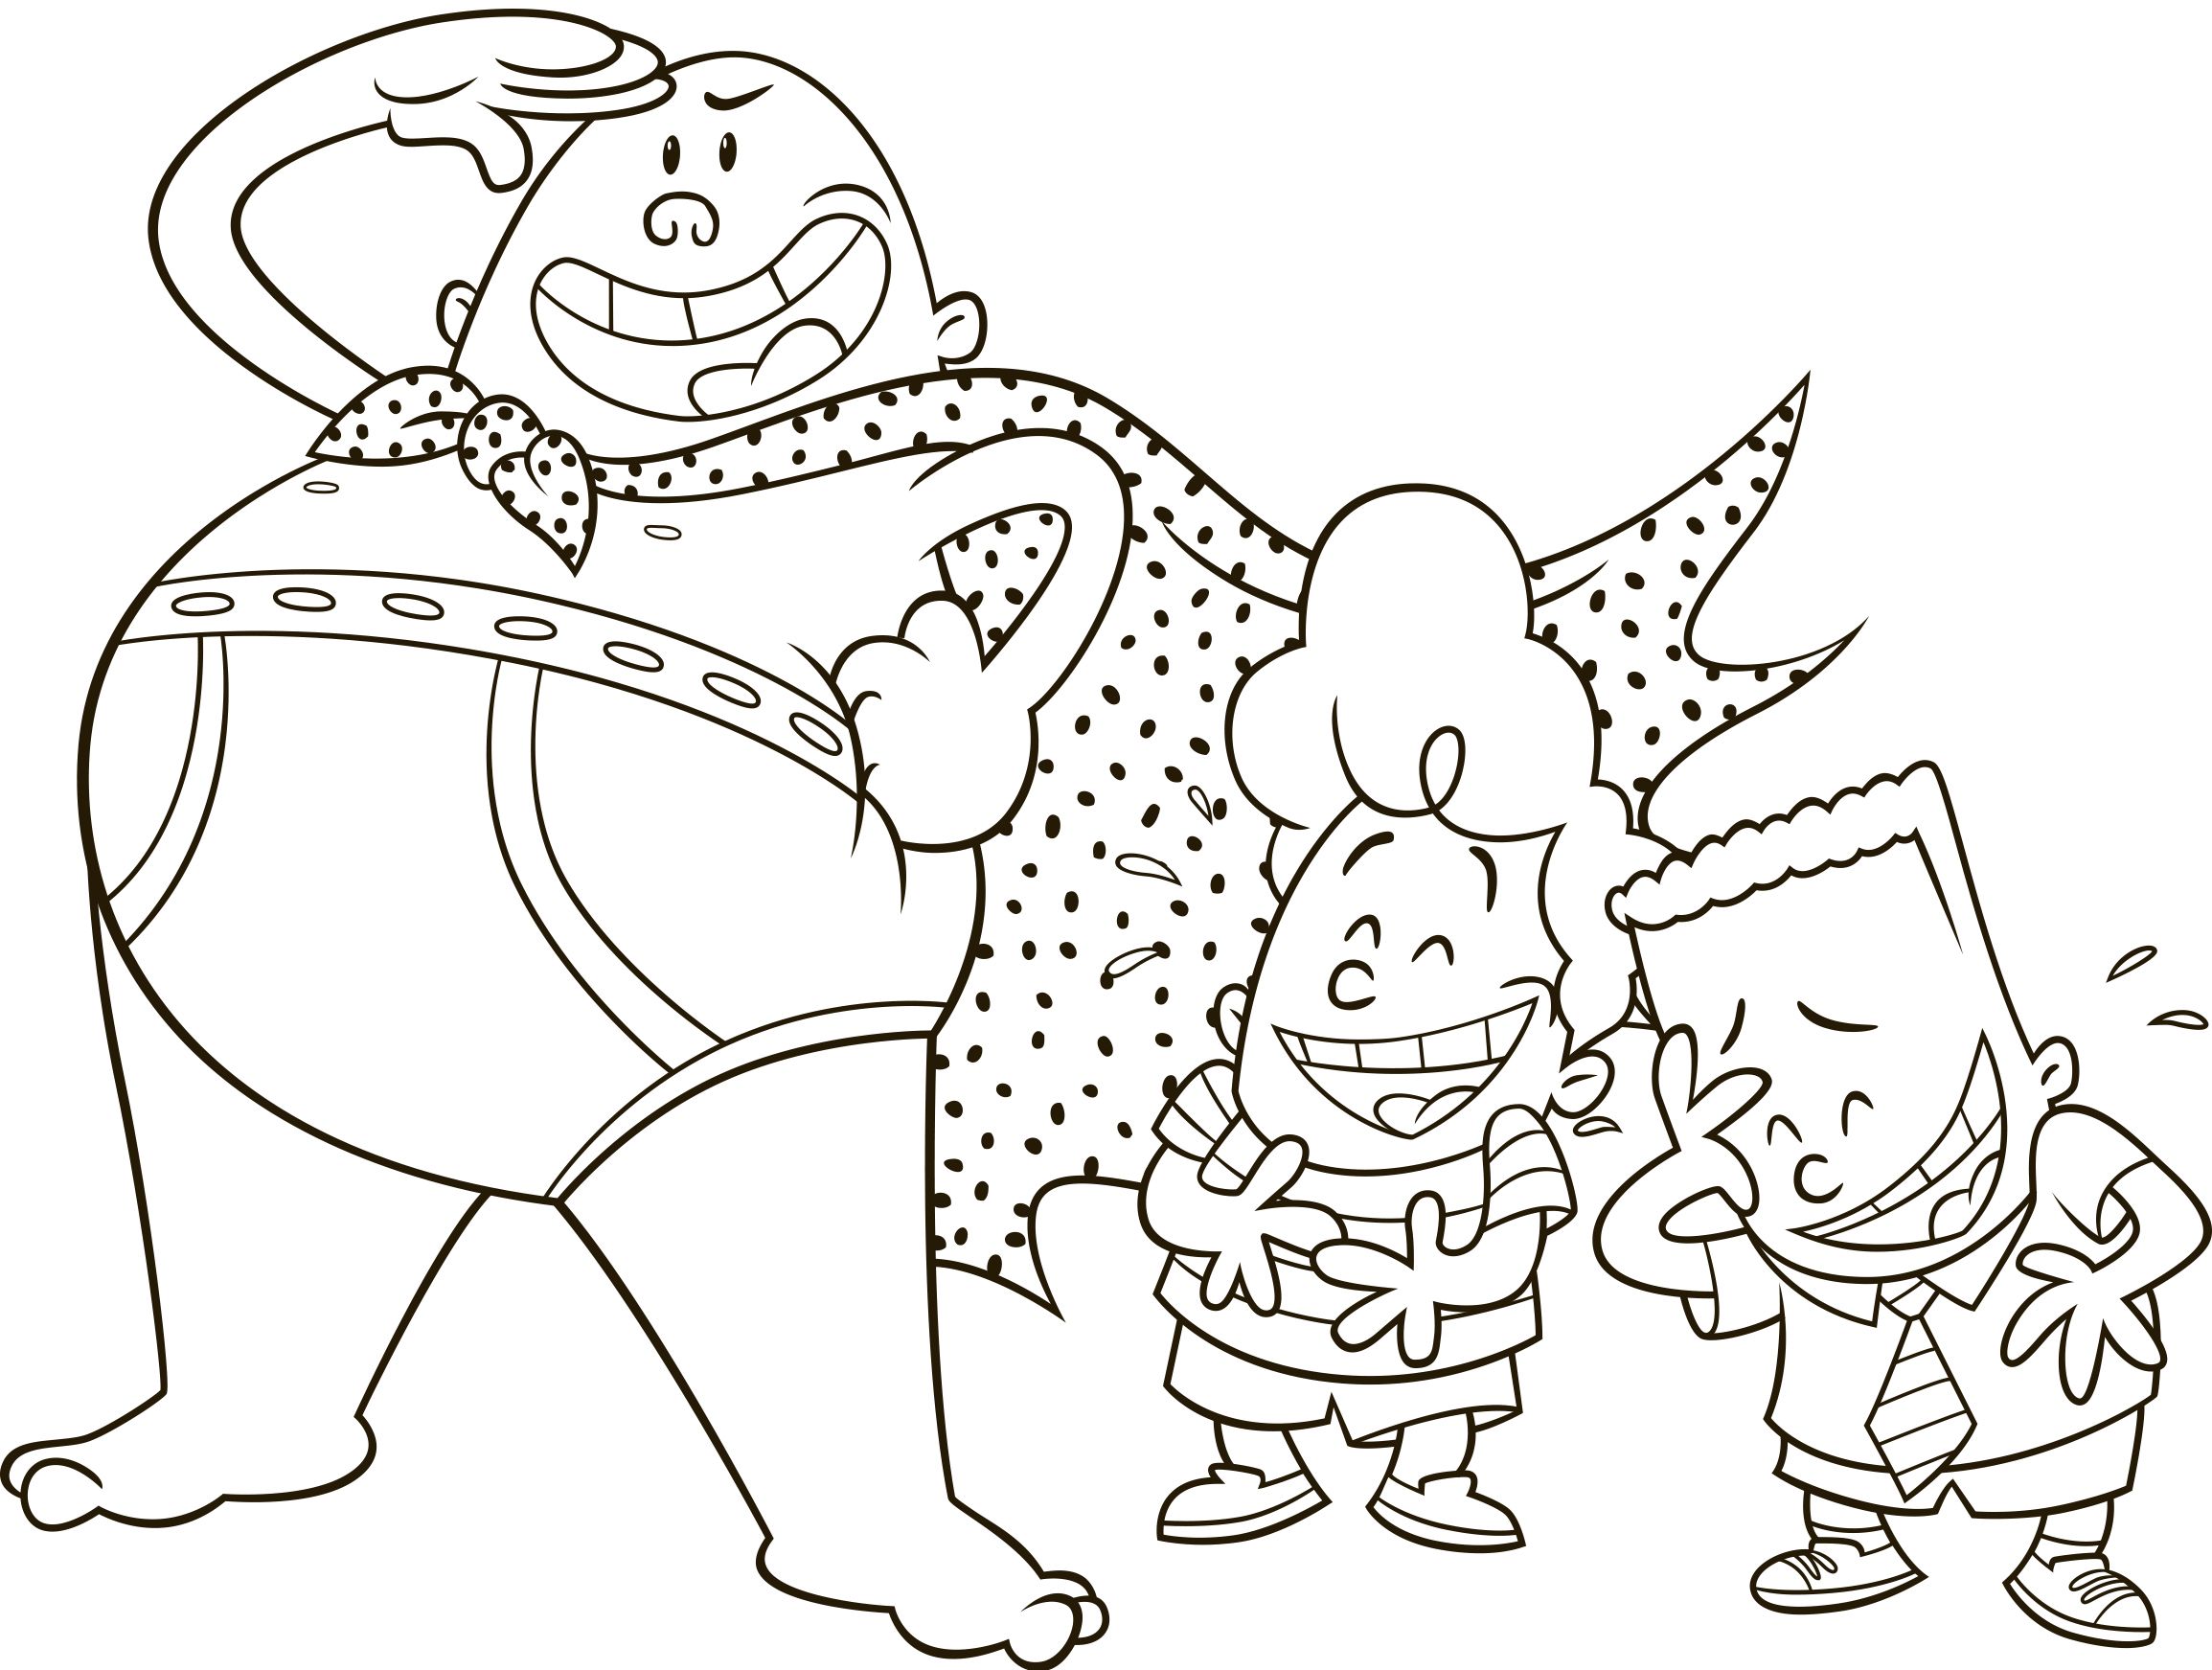 Captain Underpants: The First Epic Movie Movie Night Fun | The Review Wire  | Monster coloring pages, Captain underpants, Cartoon coloring pages